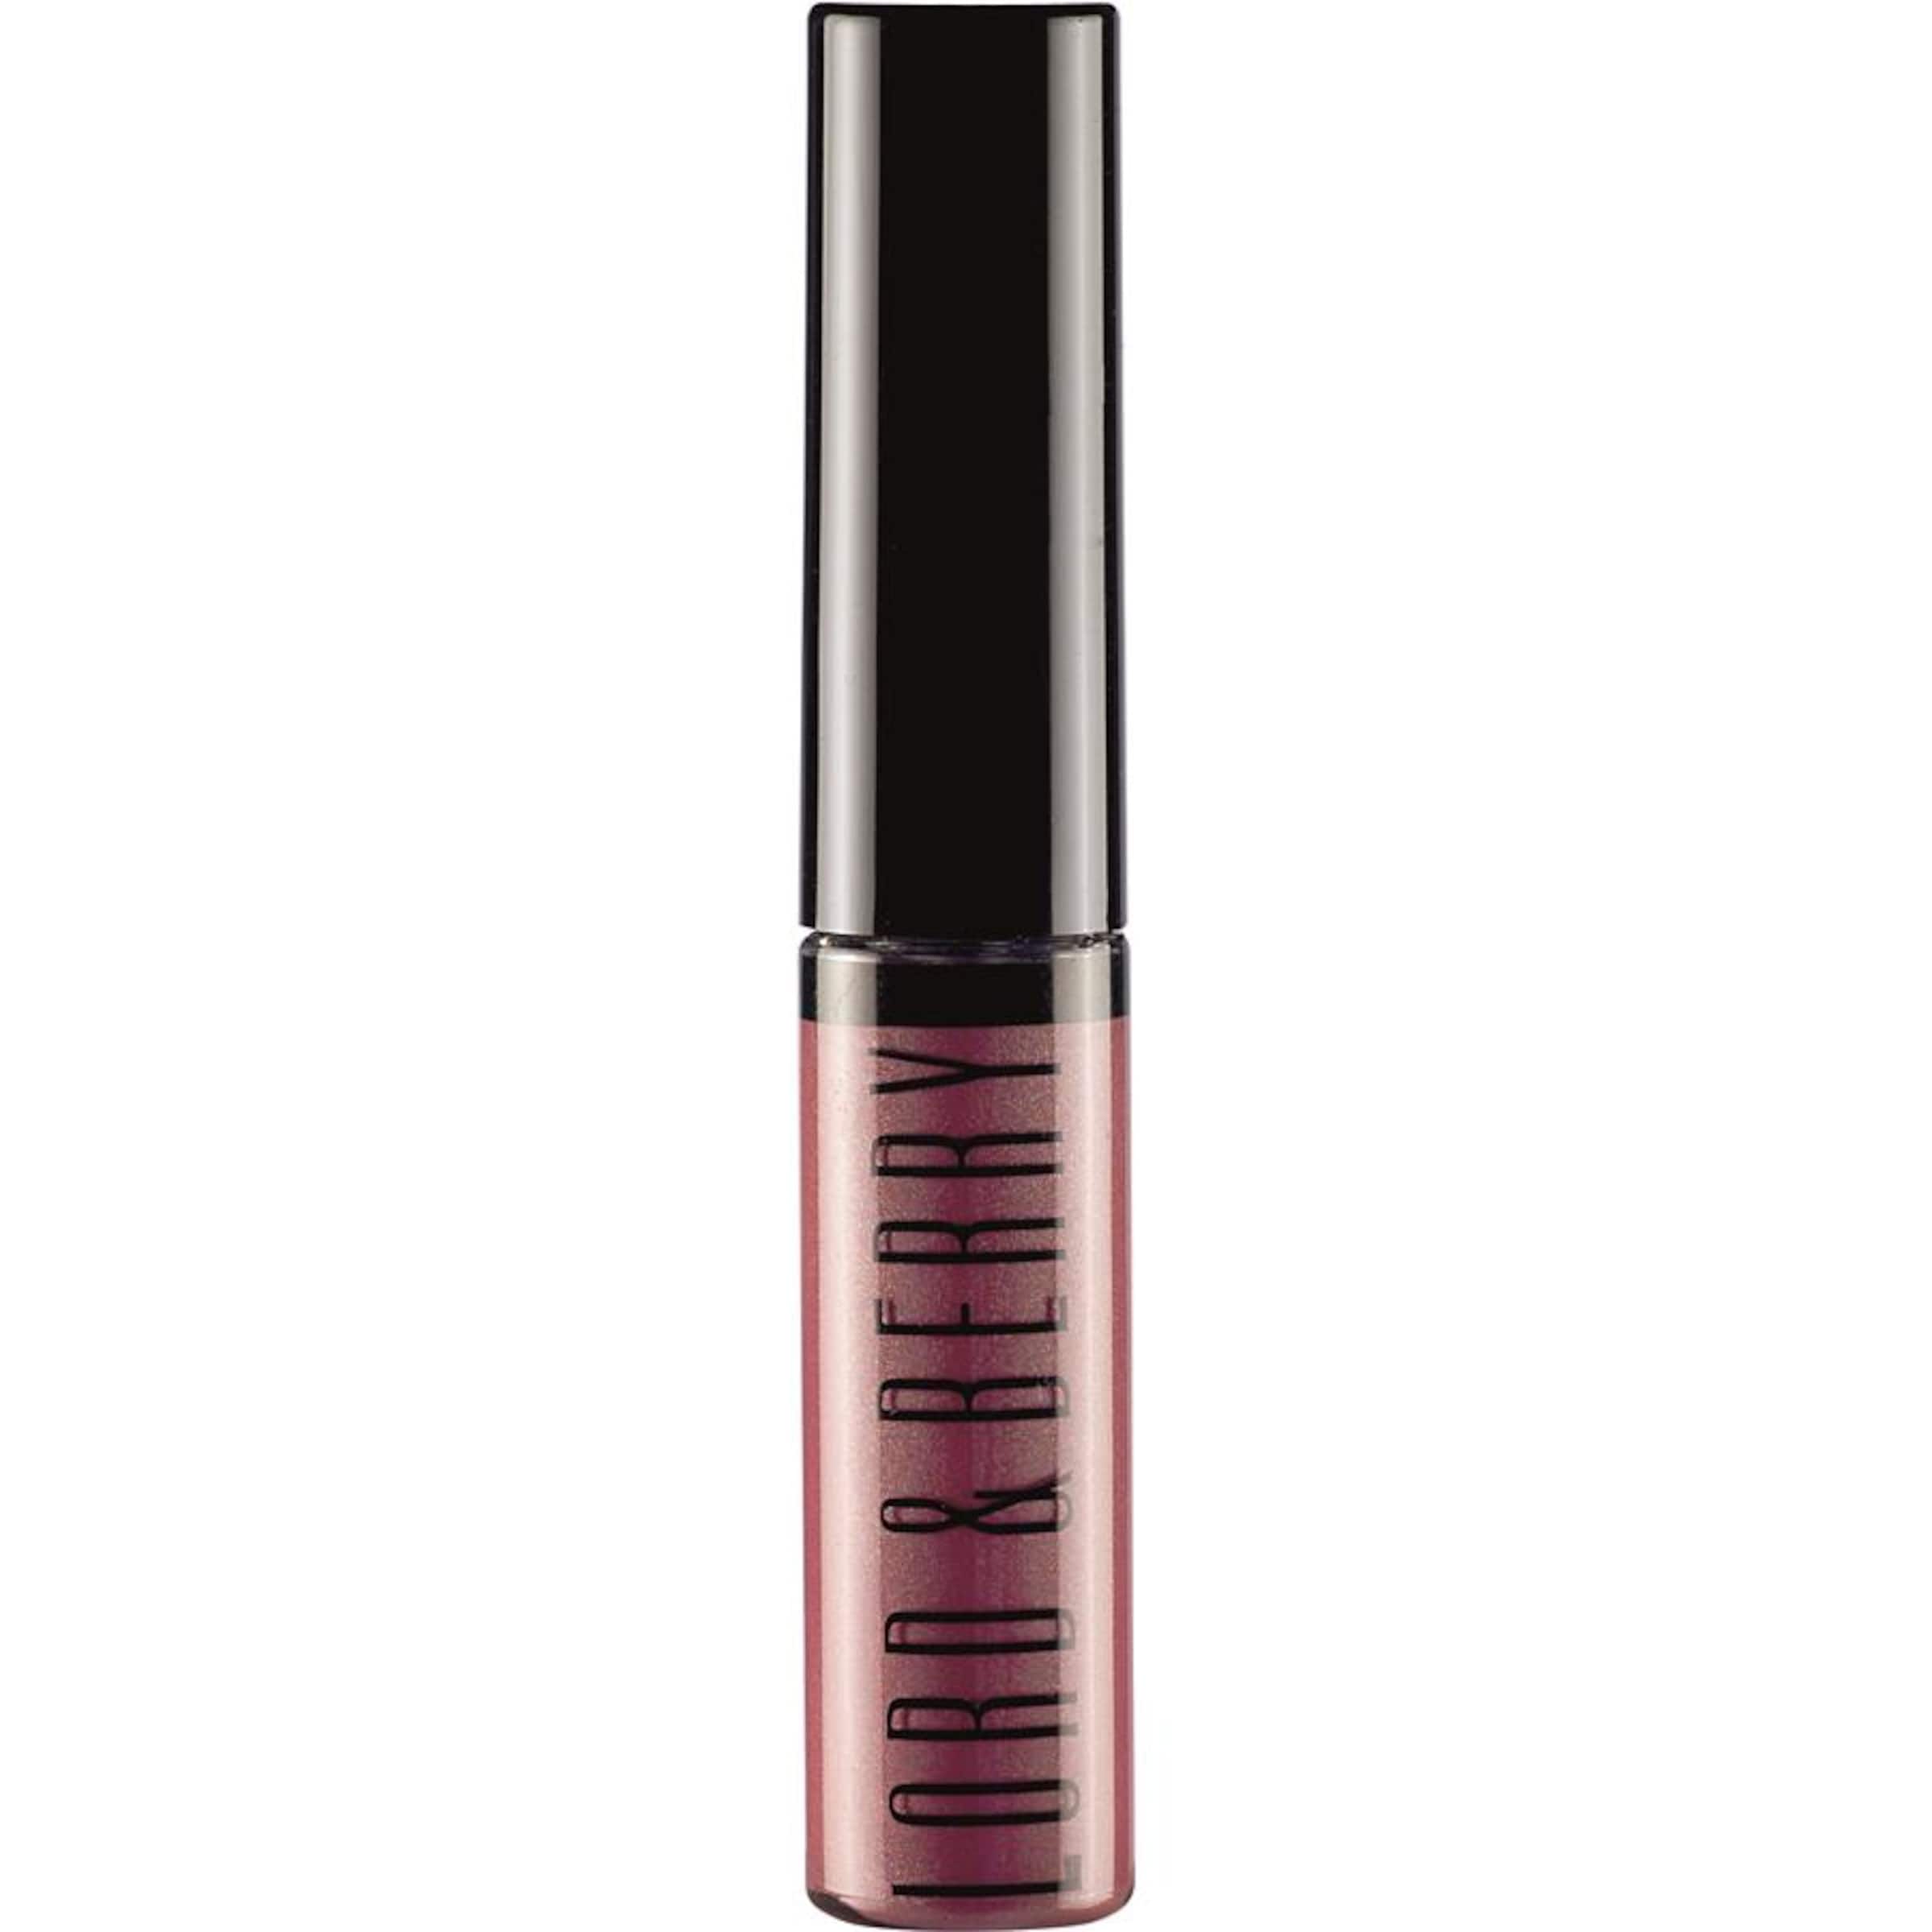 Lord & Berry Lipgloss in Lila 